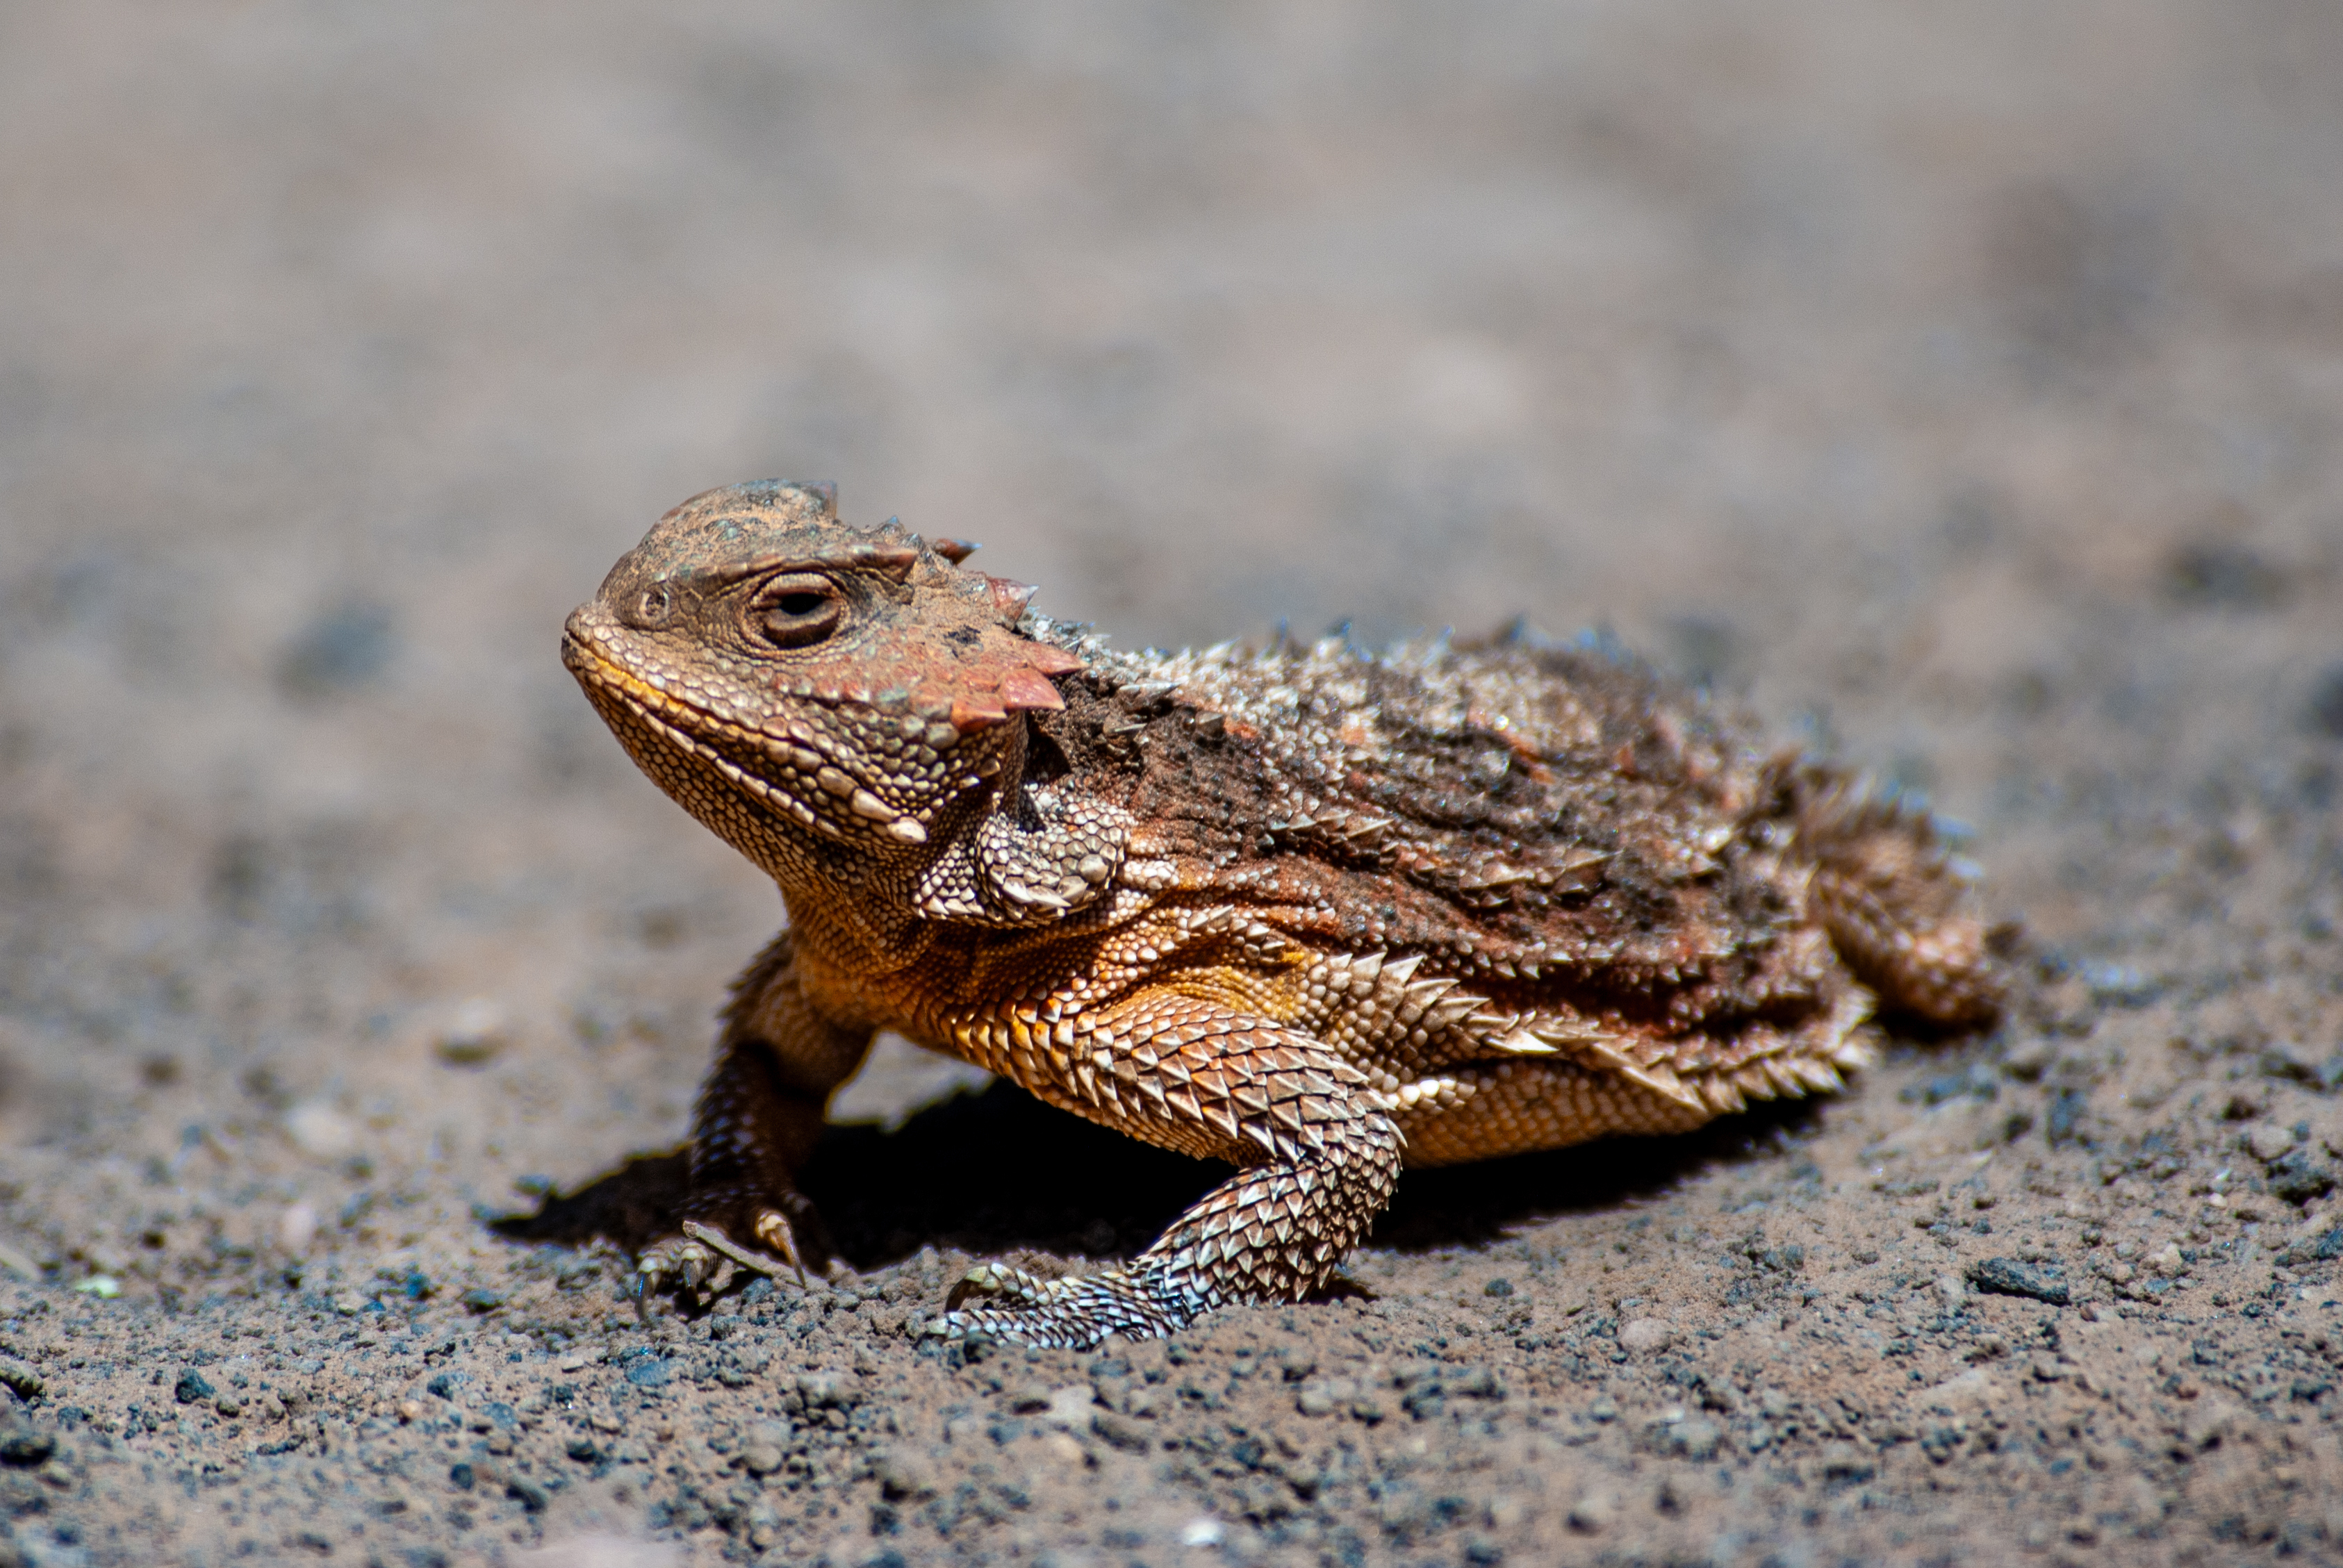 The Desert horned lizard is a species of lizard native to western North America